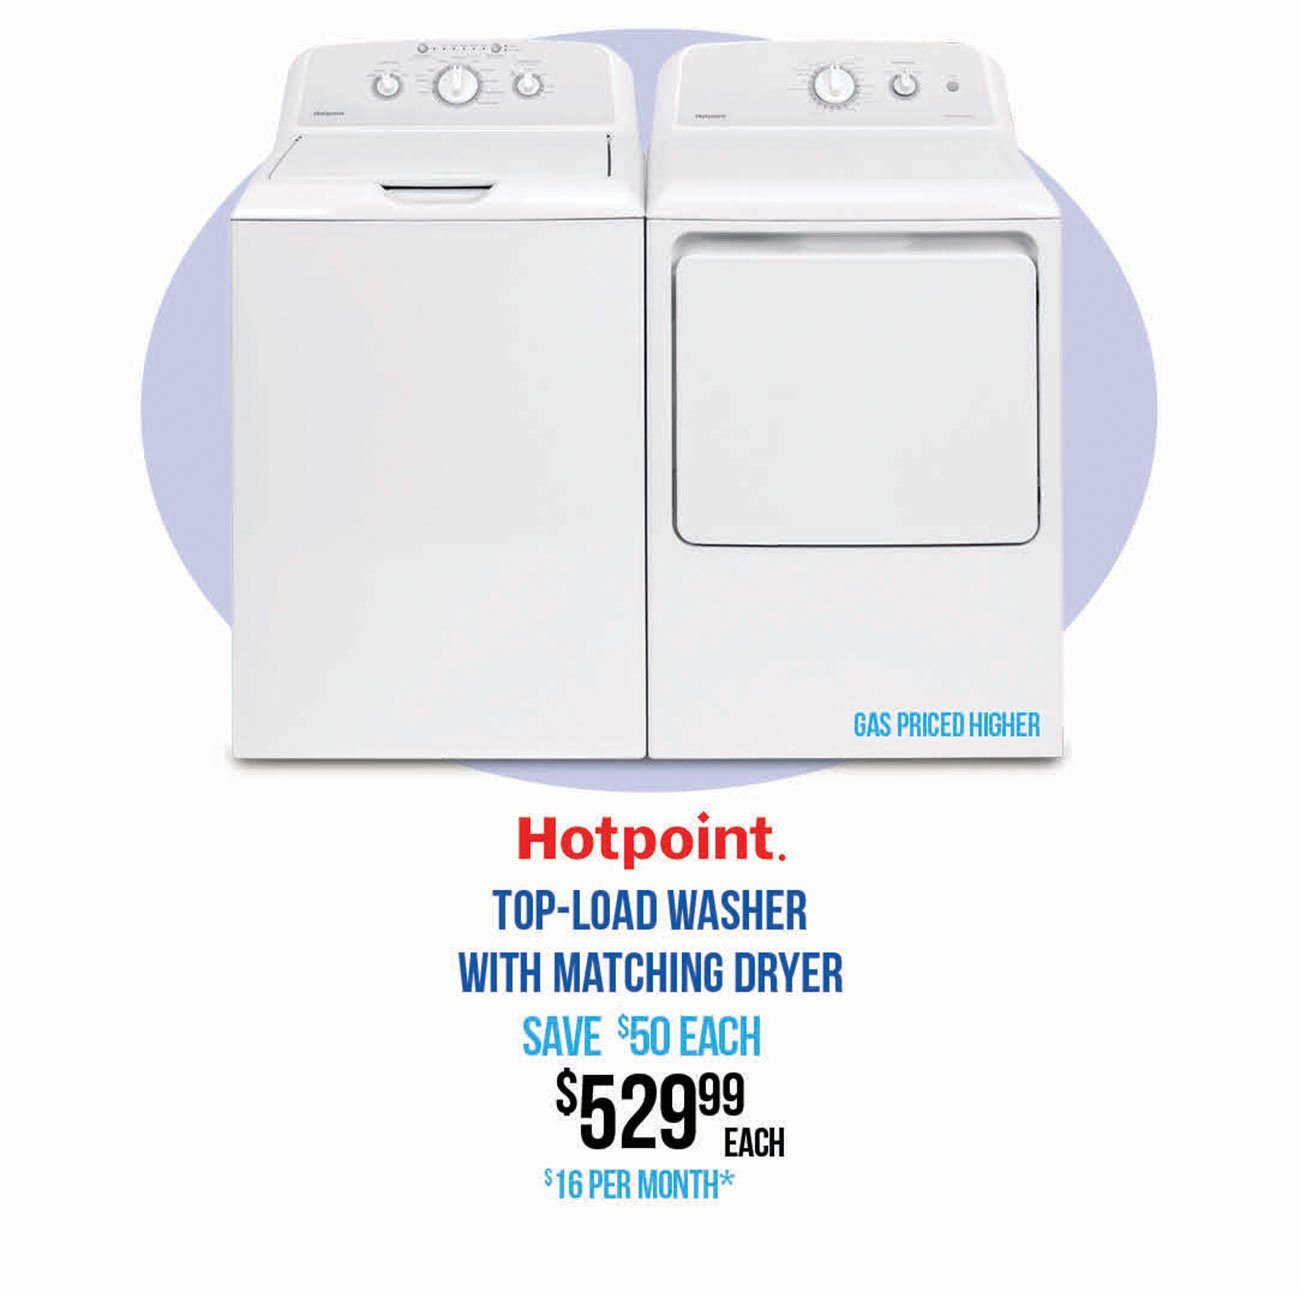 Hotpoint-Top-Load-Washer-Dryer-UIRV